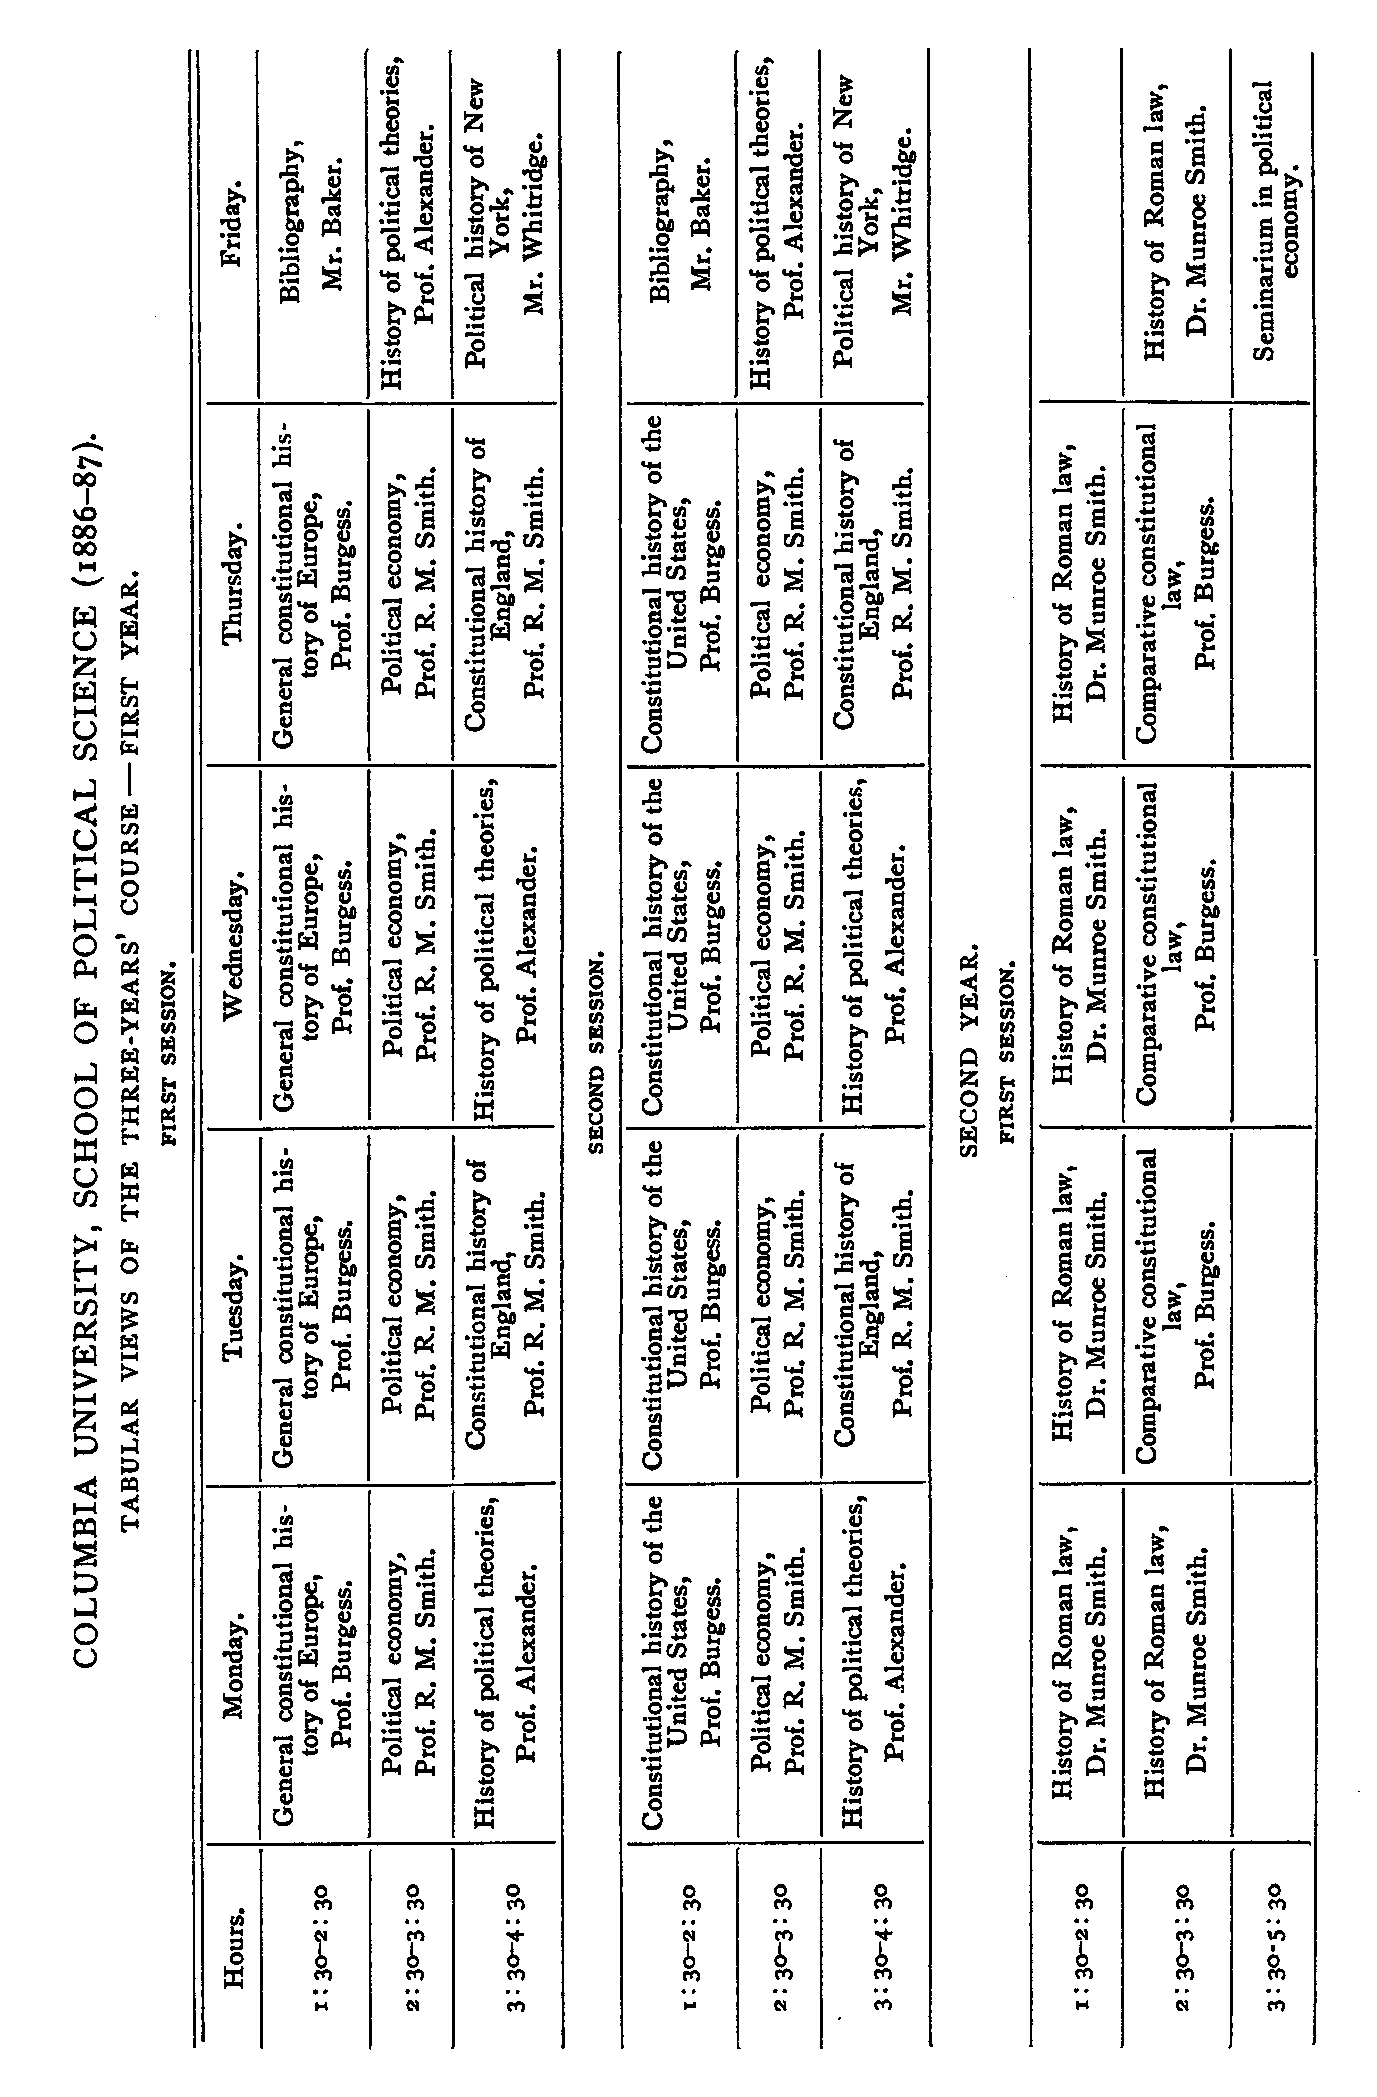 Course Schedule for Columbia University in 1900